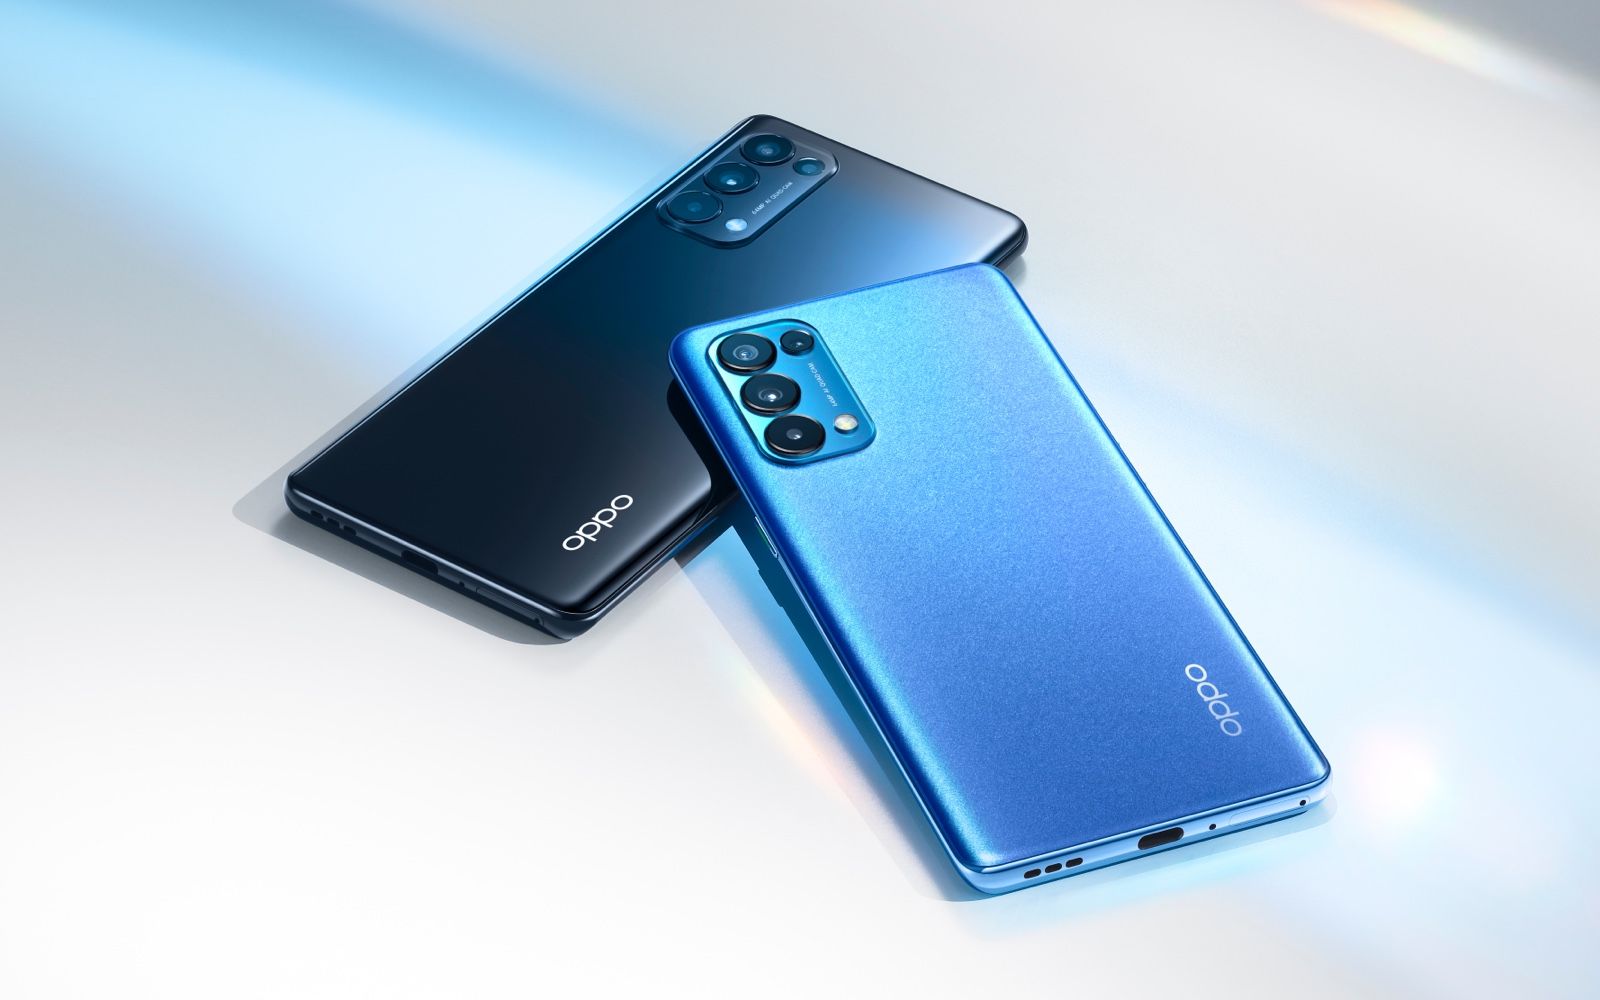 Oppo Reno 5 Pro 5G with Dimensity 1000+ SoC launching in India on Jan 18